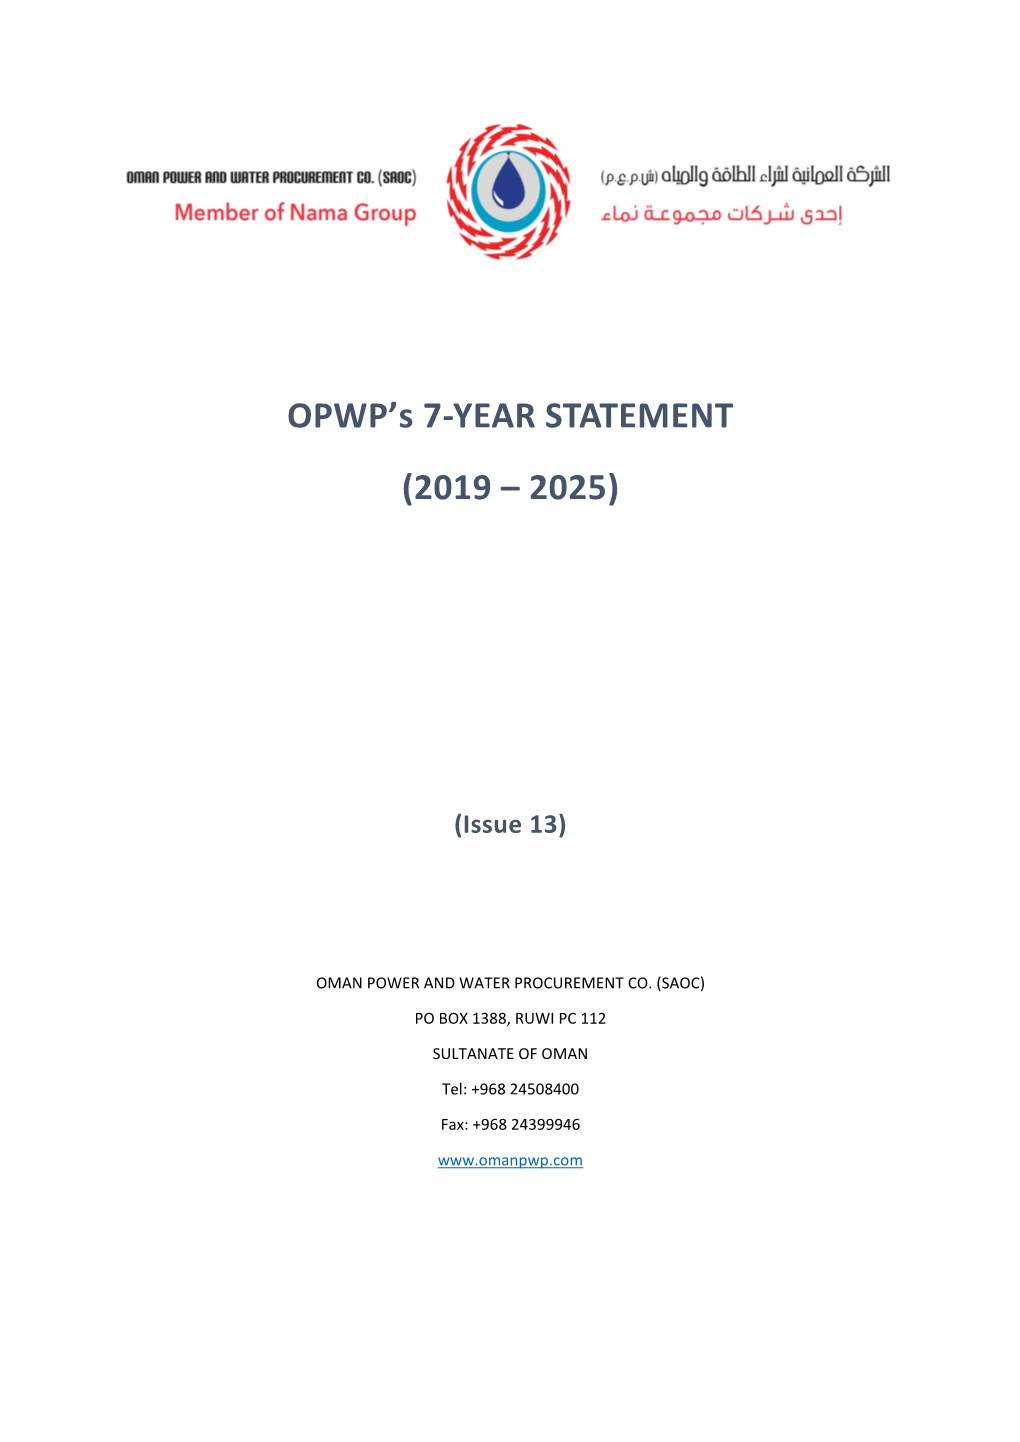 OPWP 7 Year Statement 2019 – 2025, Issue 13